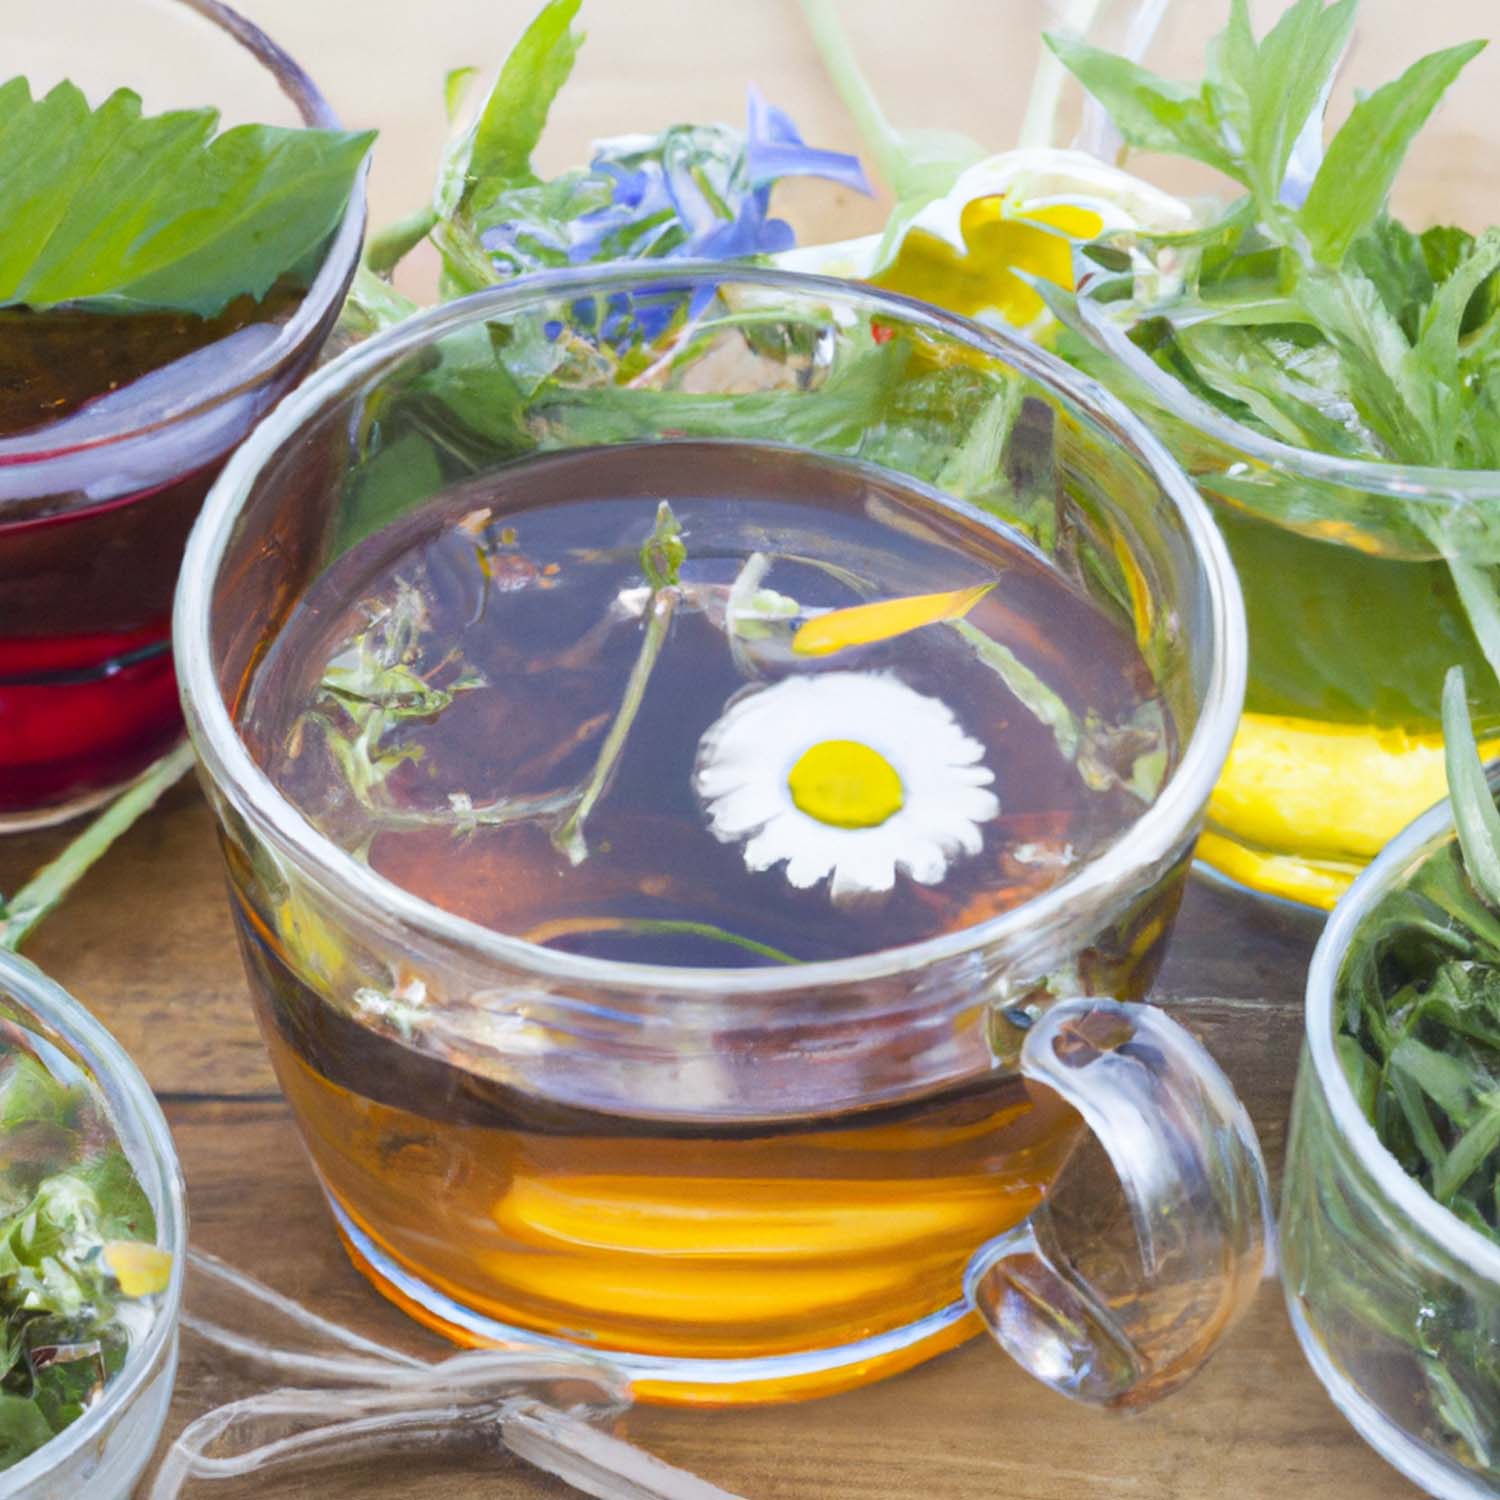 Growing and Using Herbs for Healing